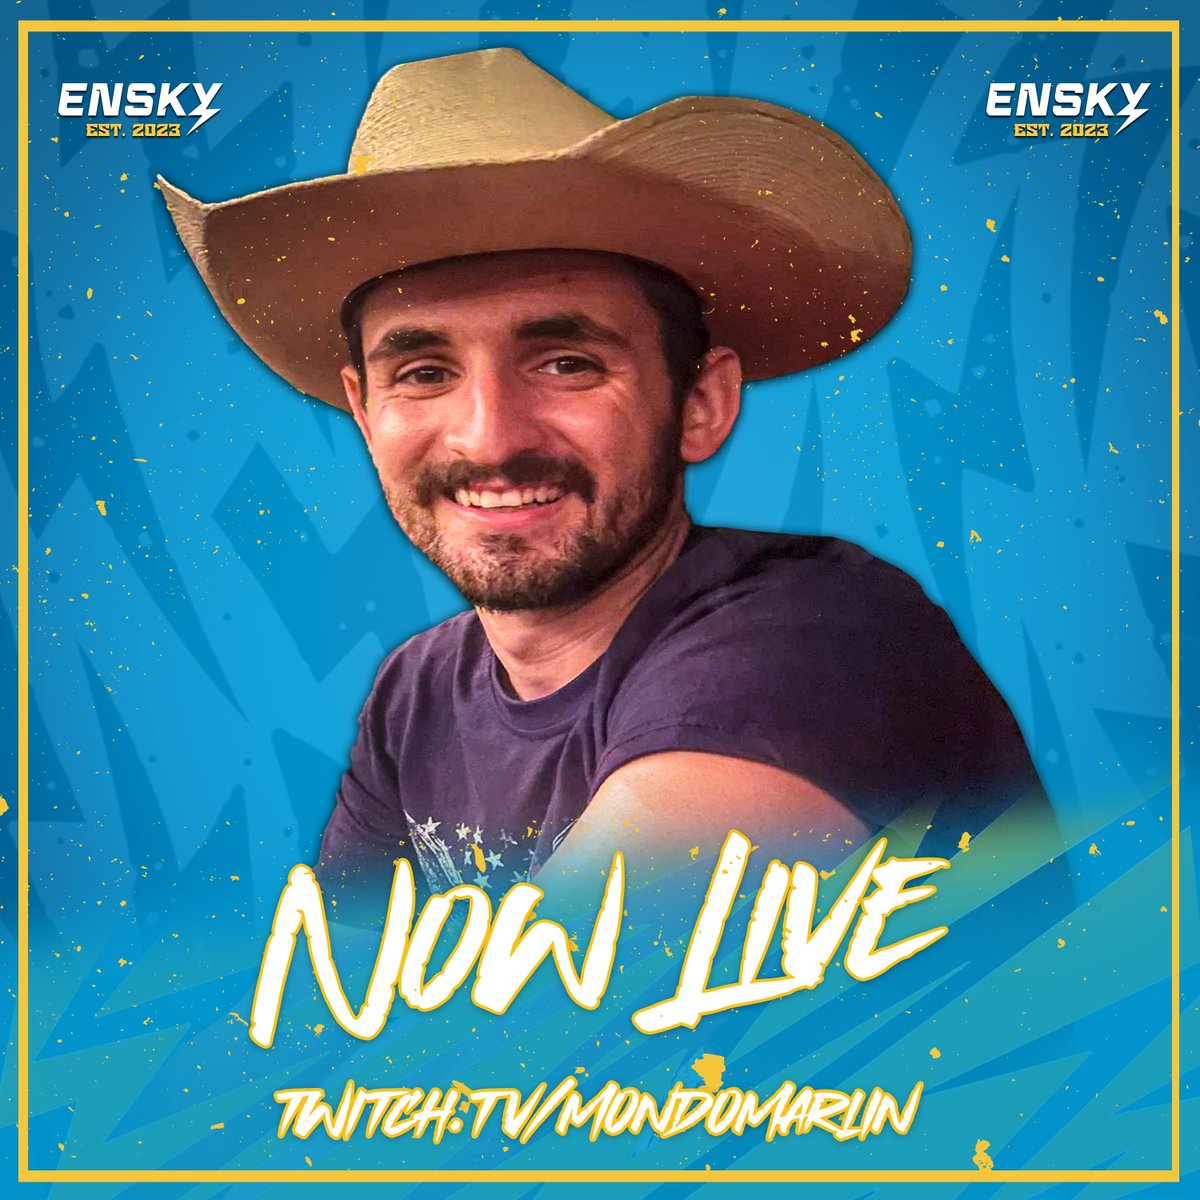 ⚡️NOW LIVE⚡️ @MondoMarlin is now live with some #Hellletloose action! twitch.tv/mondomarlin #RiseUp⚡️